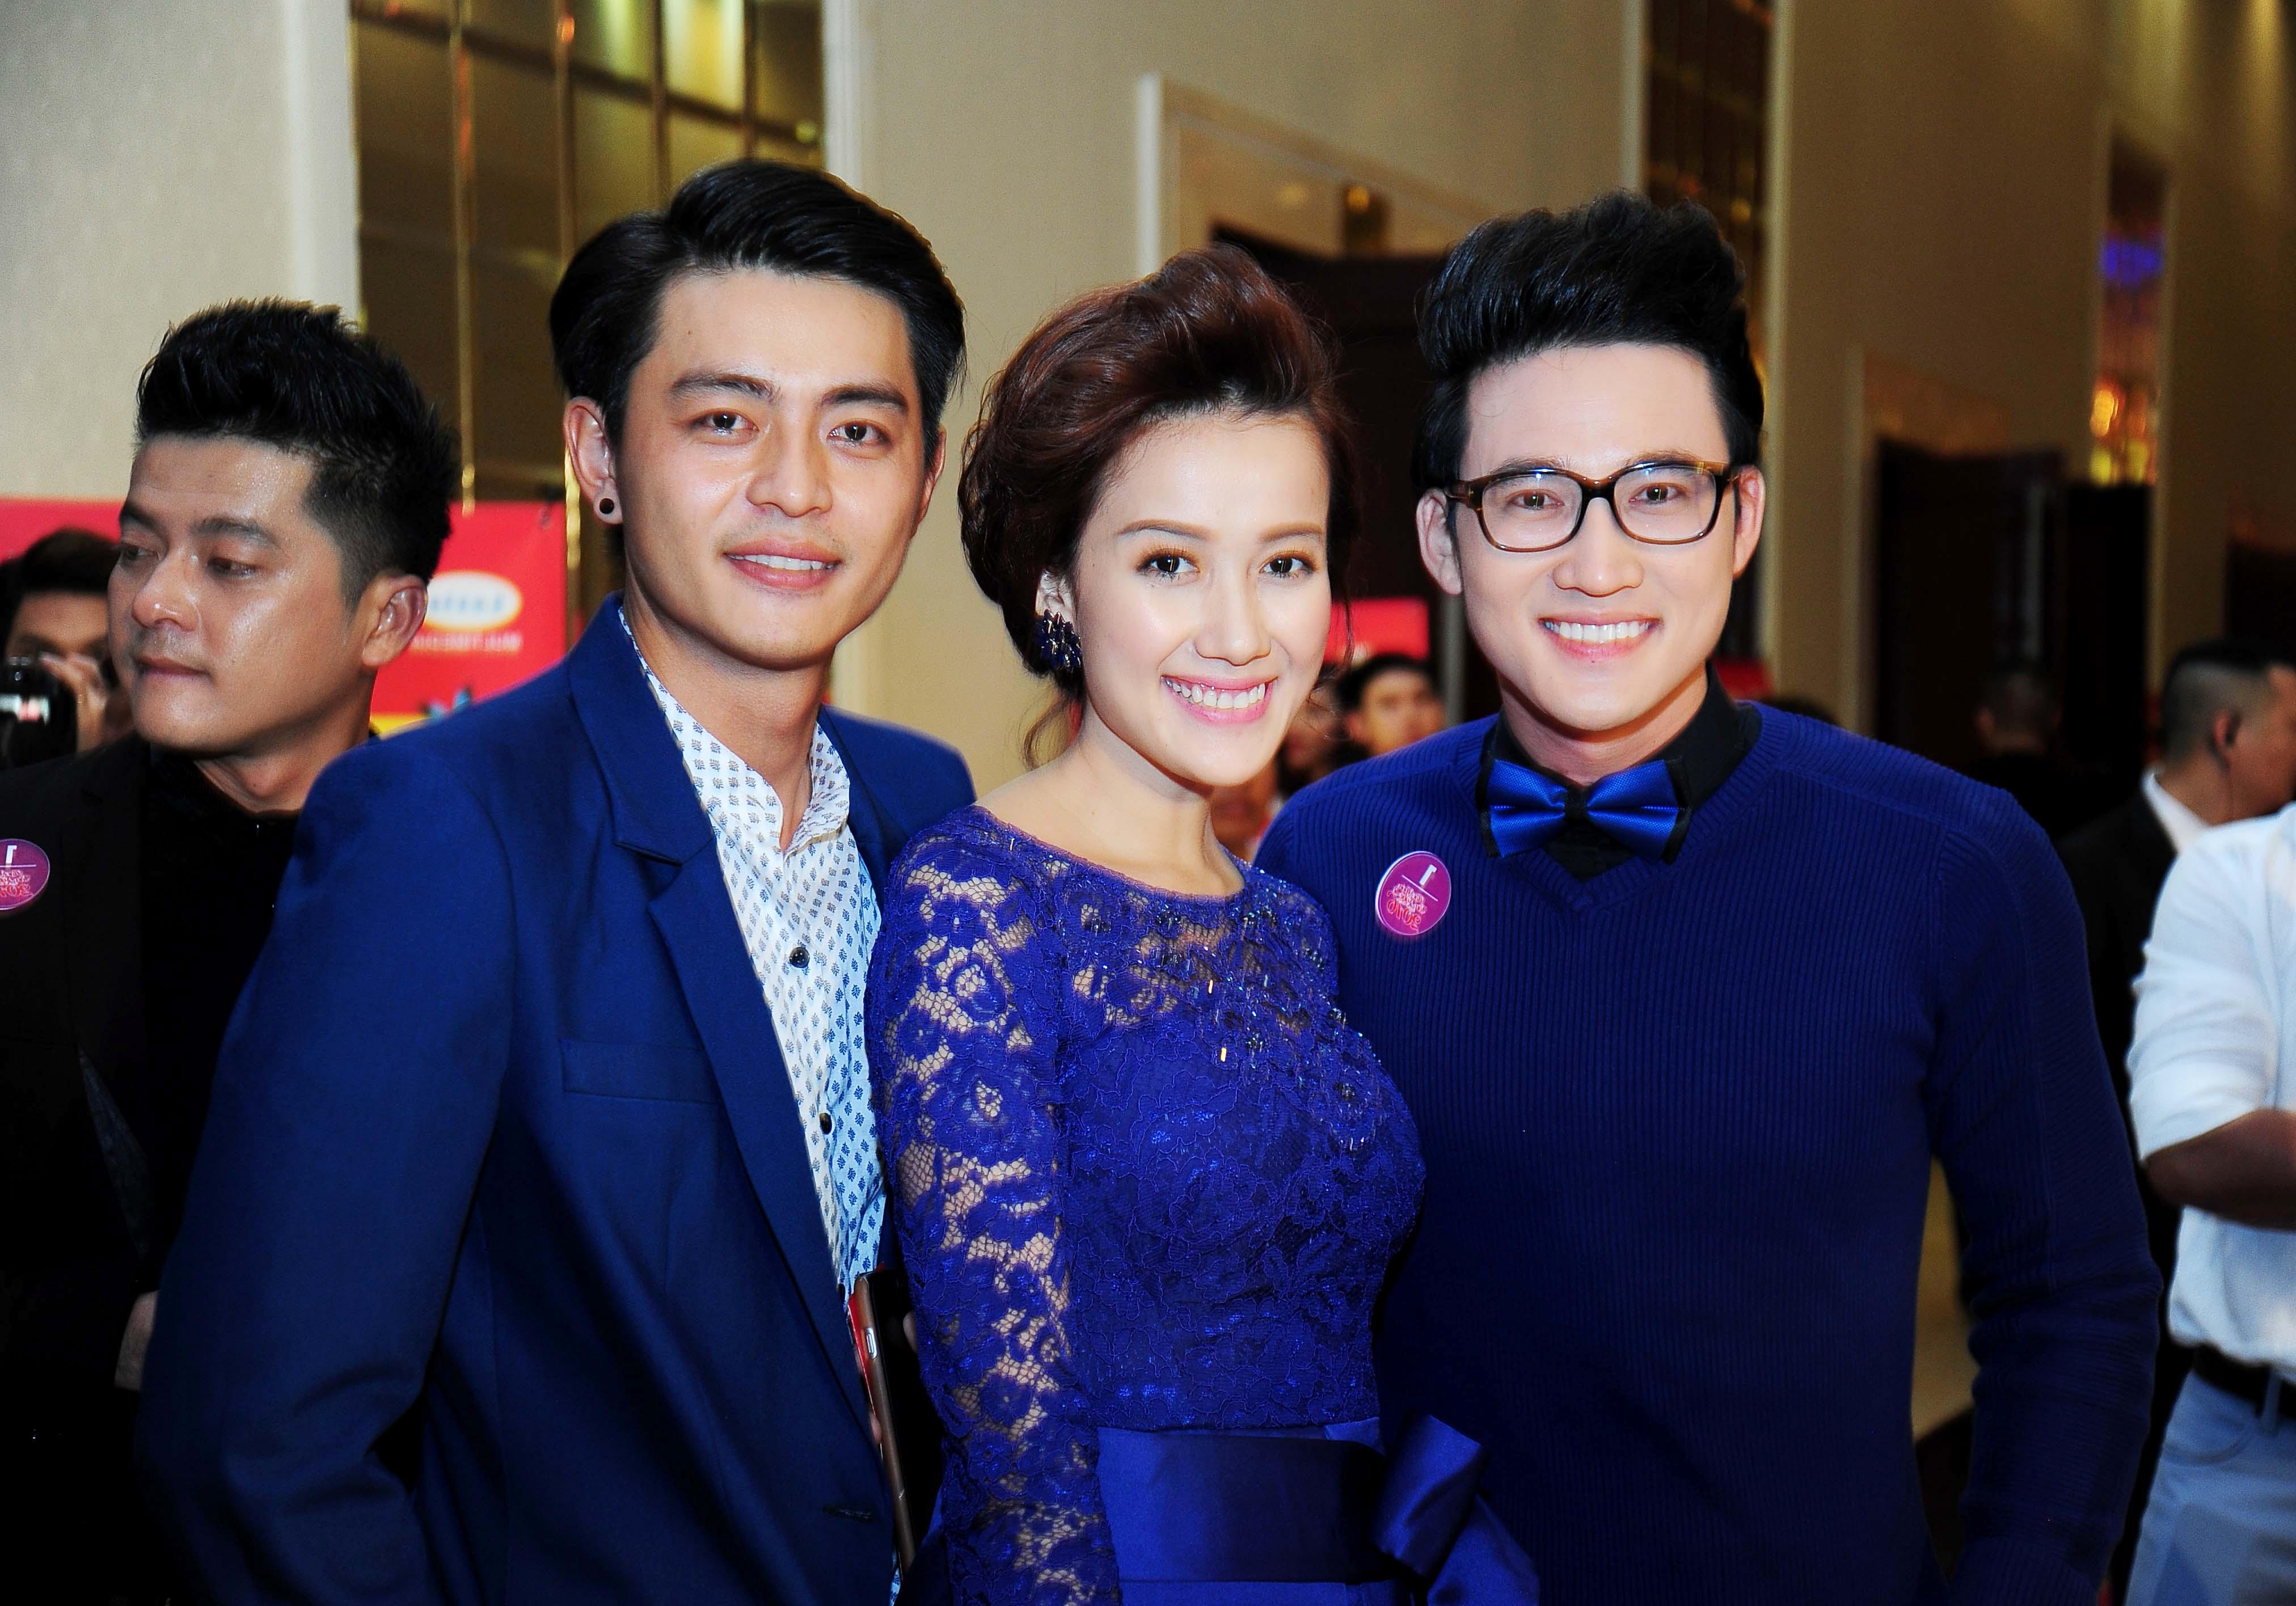 Bui Le Kim Ngoc and co-stars in a recent event